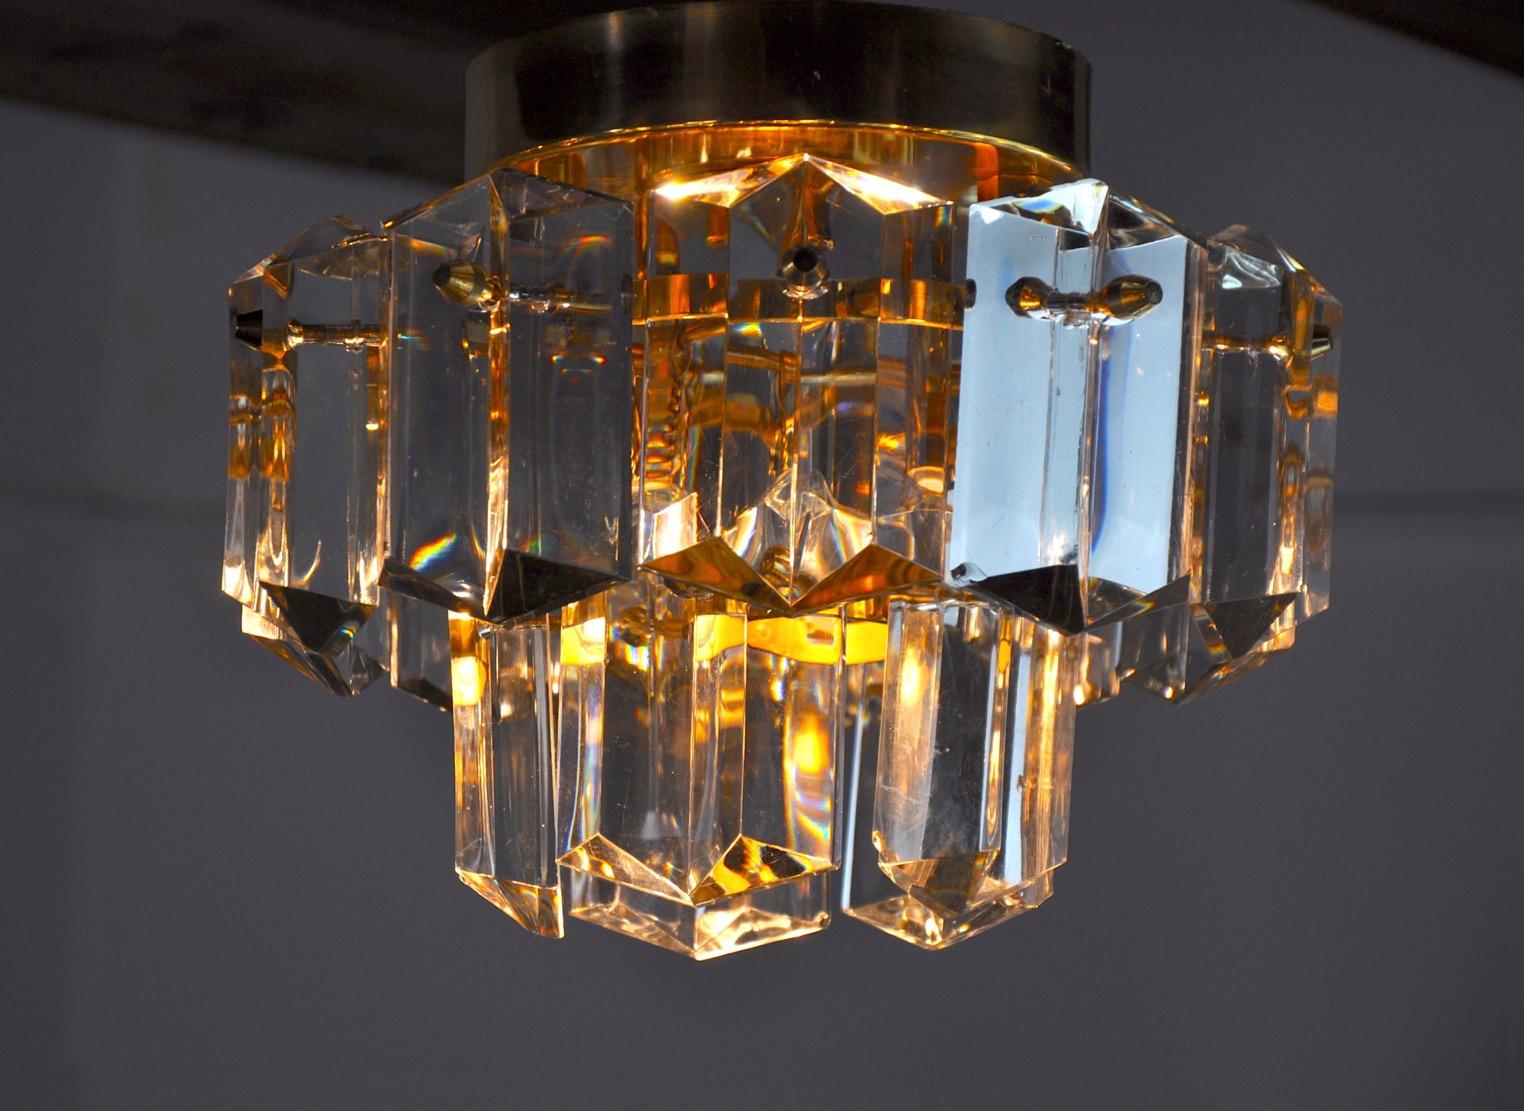 Rare and superb kinkeldey ceiling lamp designated and produced in germany in the 70s. Golden brass structure composed of cut crystals spread over 2 levels. Rare design object that will illuminate your interior wonderfully. Electricity verified, time